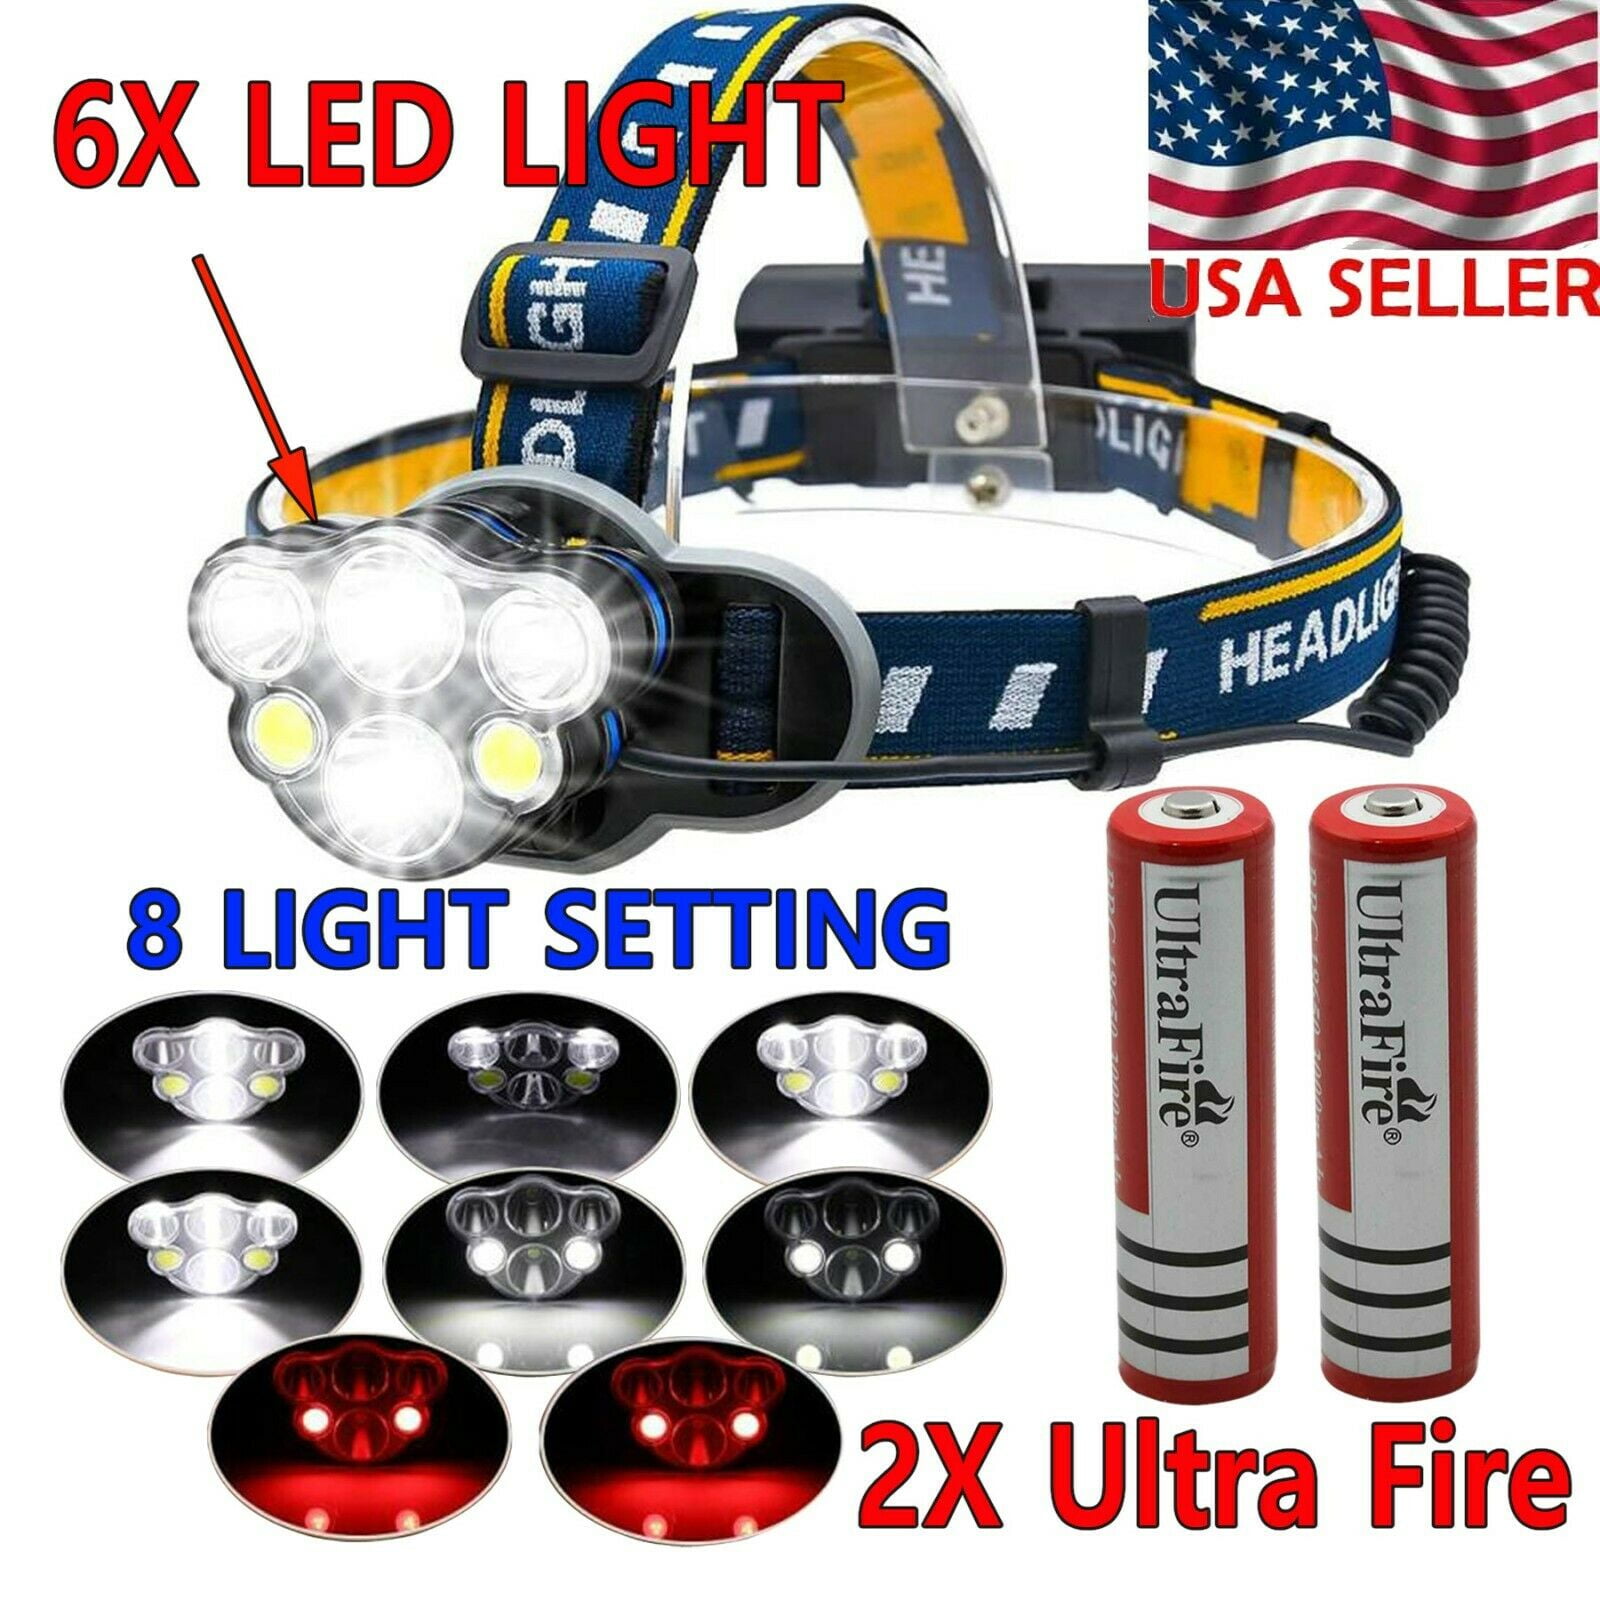 Details about   250000LM 5X T6 LED Headlamp Rechargeable Head Light Flashlight Torch Lamp USA